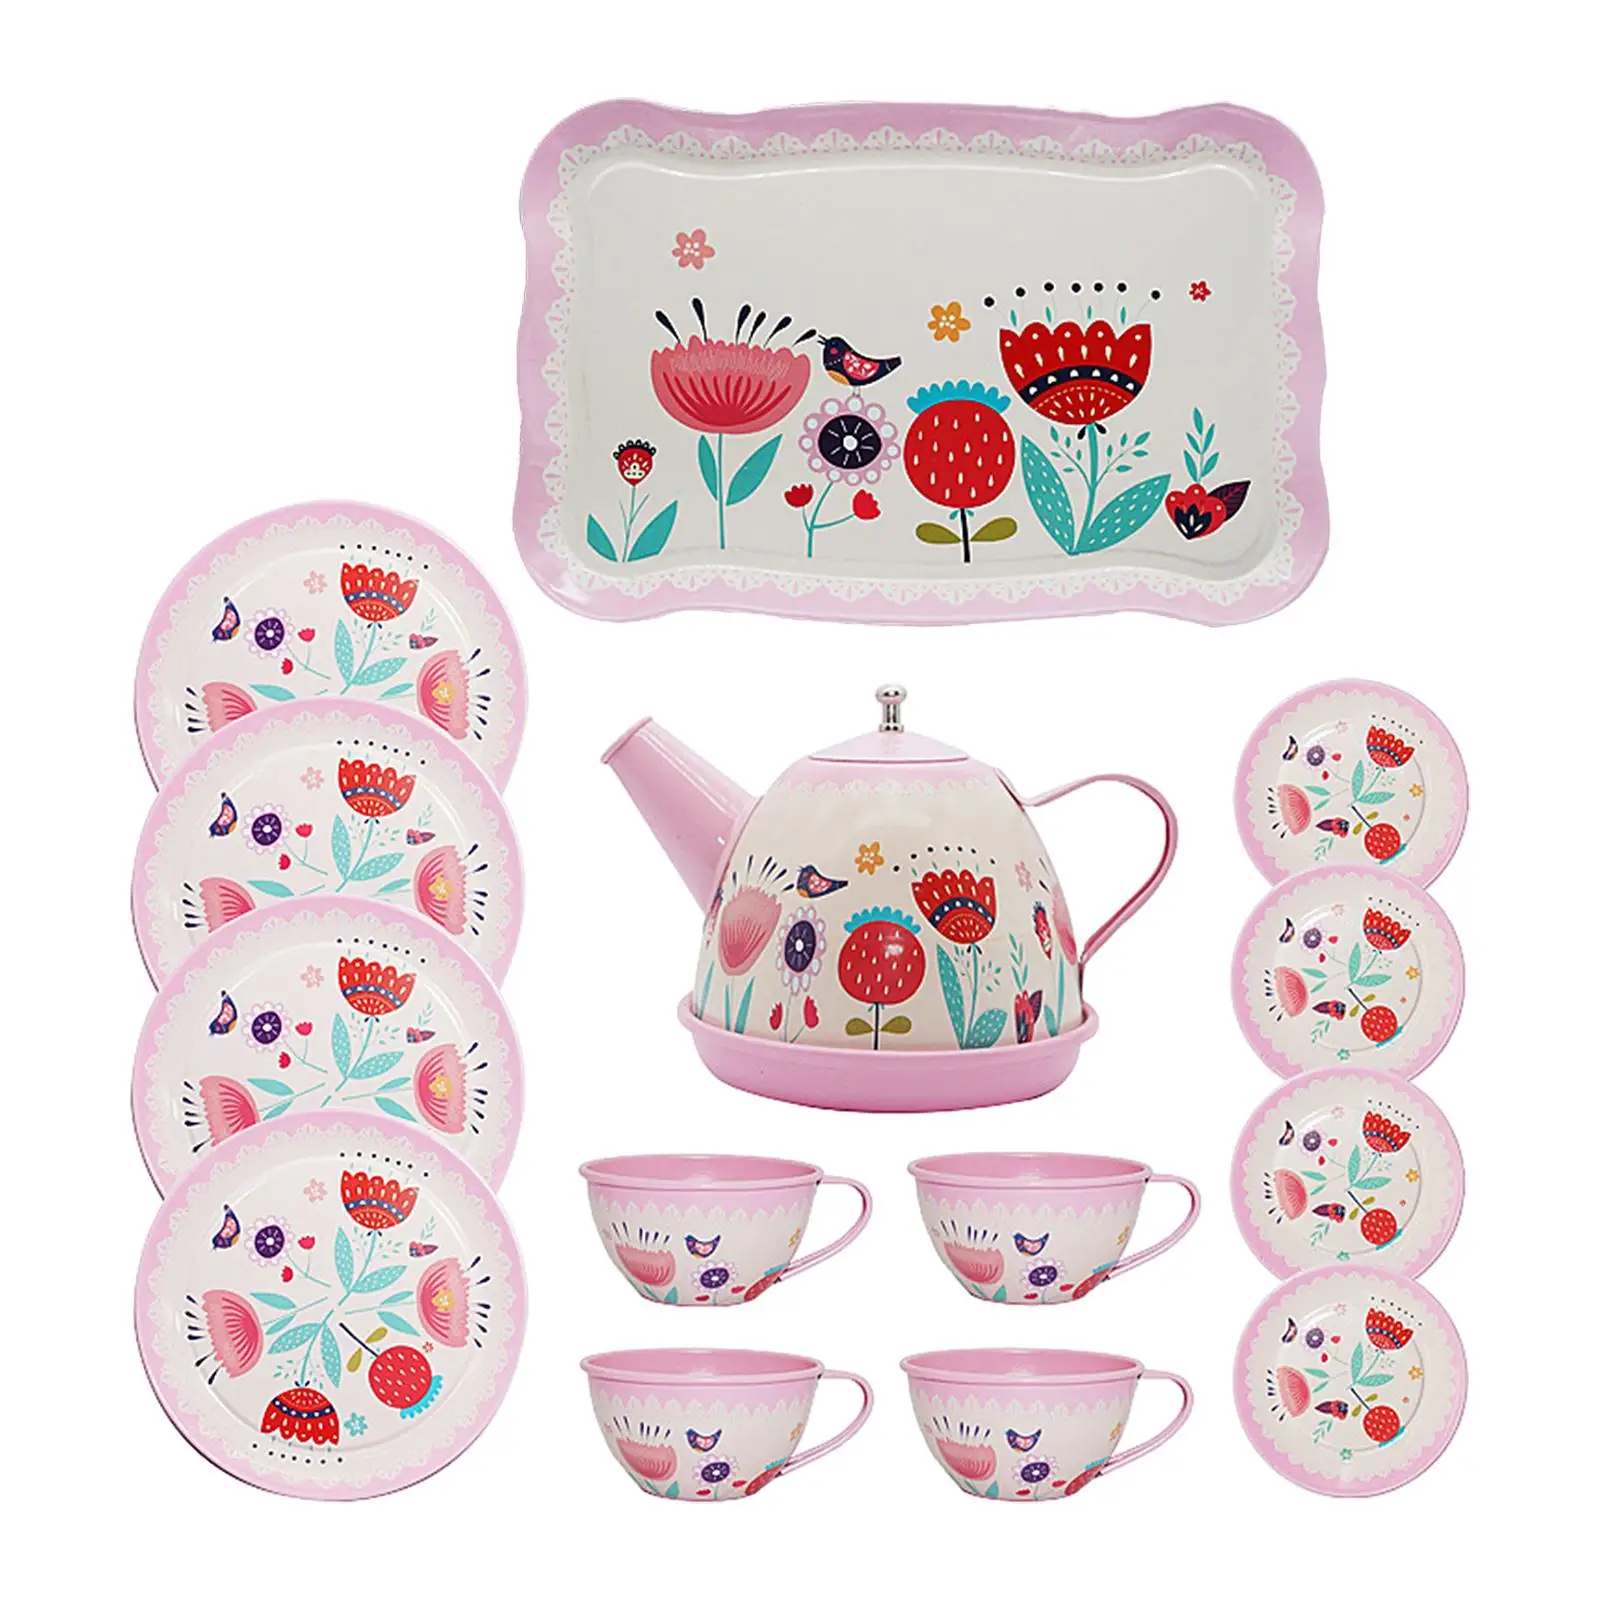 Kids Tea Set for Little Girls Pretend Toy Educational with Metal Teapots Cups Plates Tea Party Set for Kids Children Age 3 4 5 6